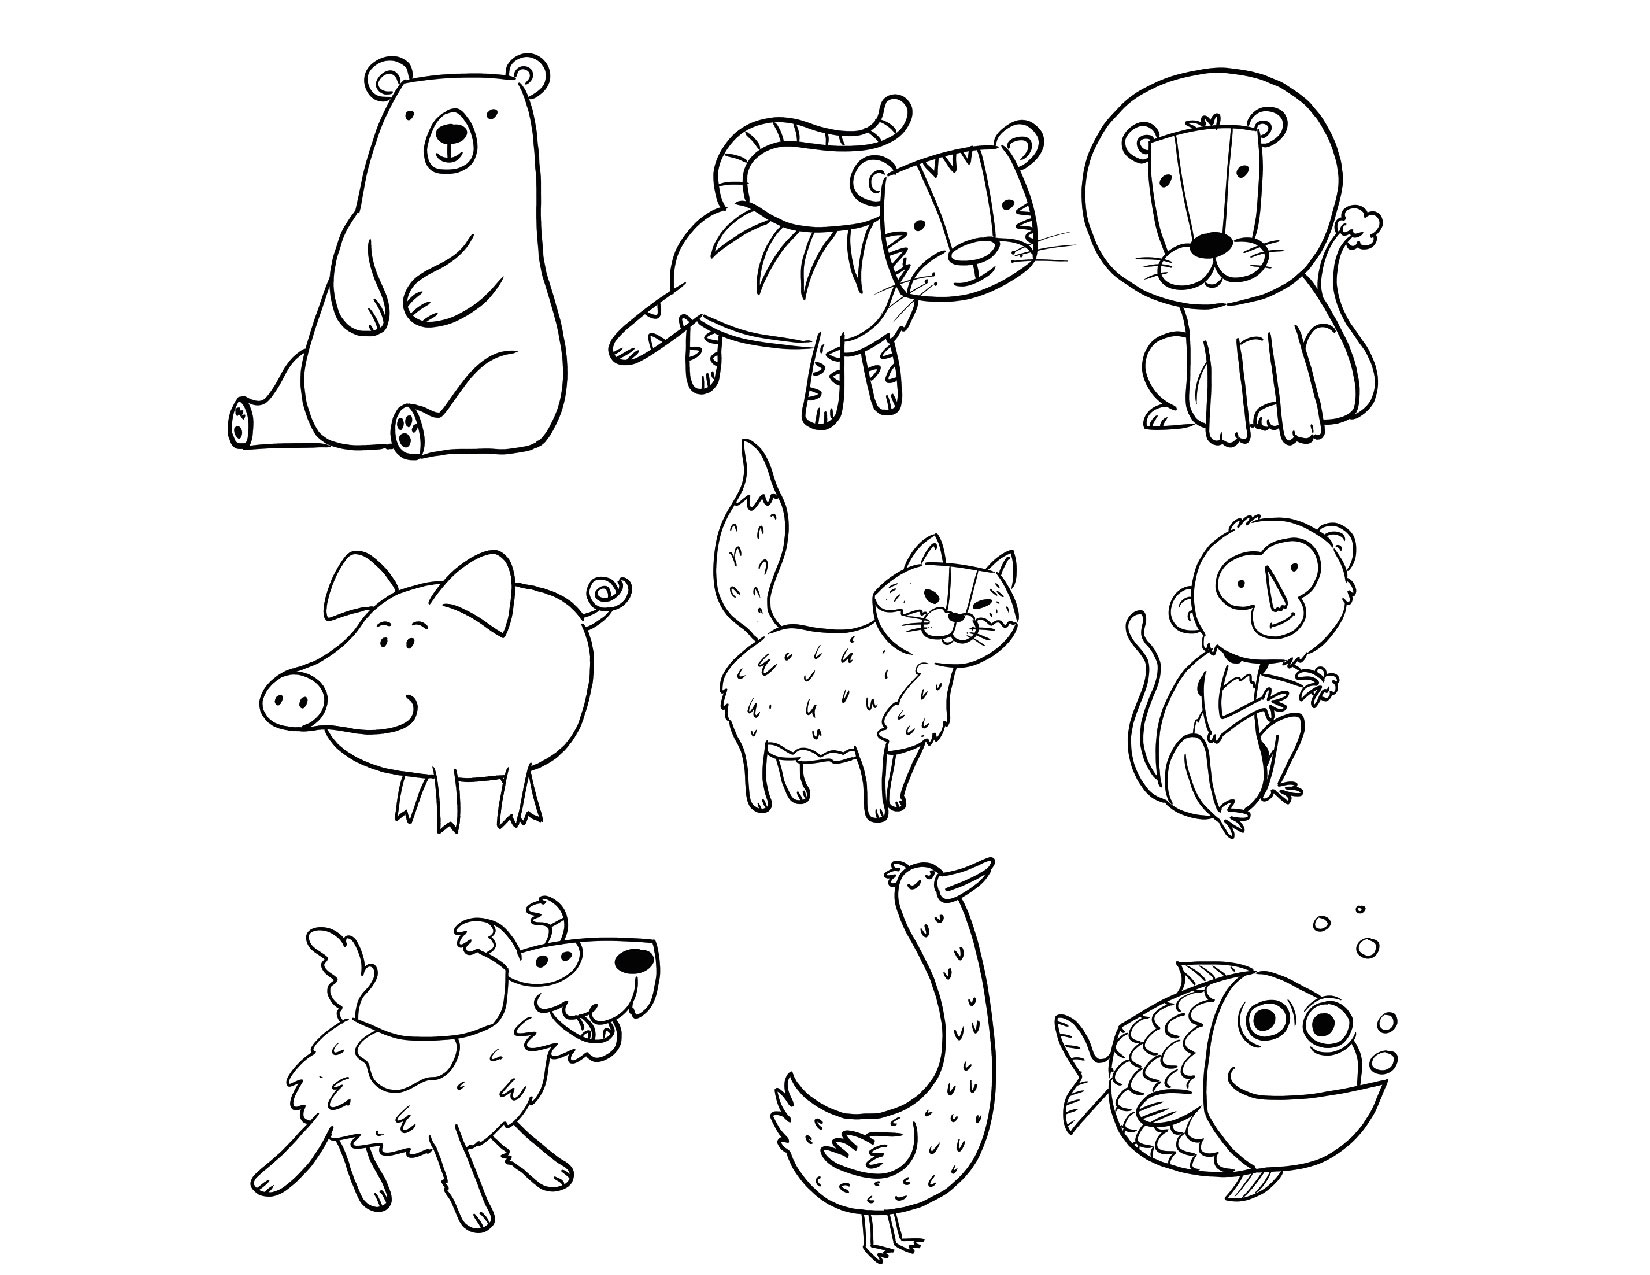 Coloring page of a polar bear, tiger, lion, pig, cat, monkey, dog, chicken, and fish